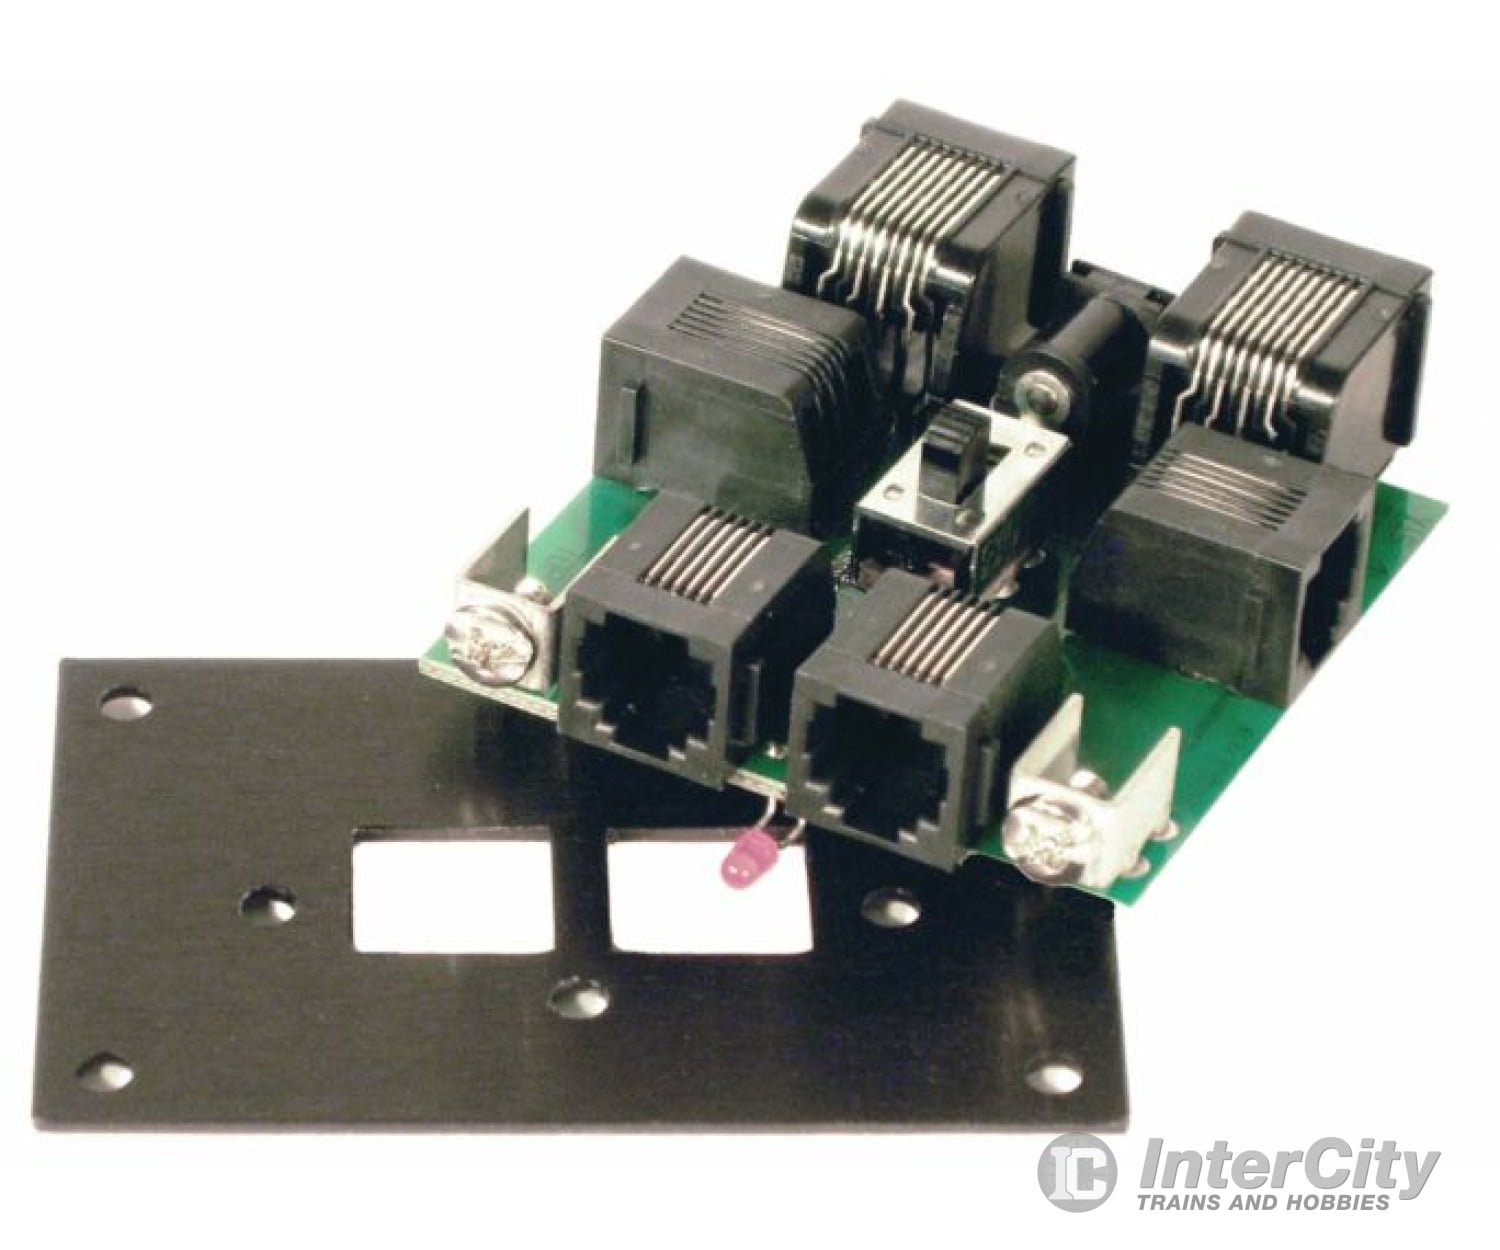 Nce A 234 Utp-Cat5 Fascia Panel -- With 2 Cat Rj45 Sockets On Back Command Stations & Expansion